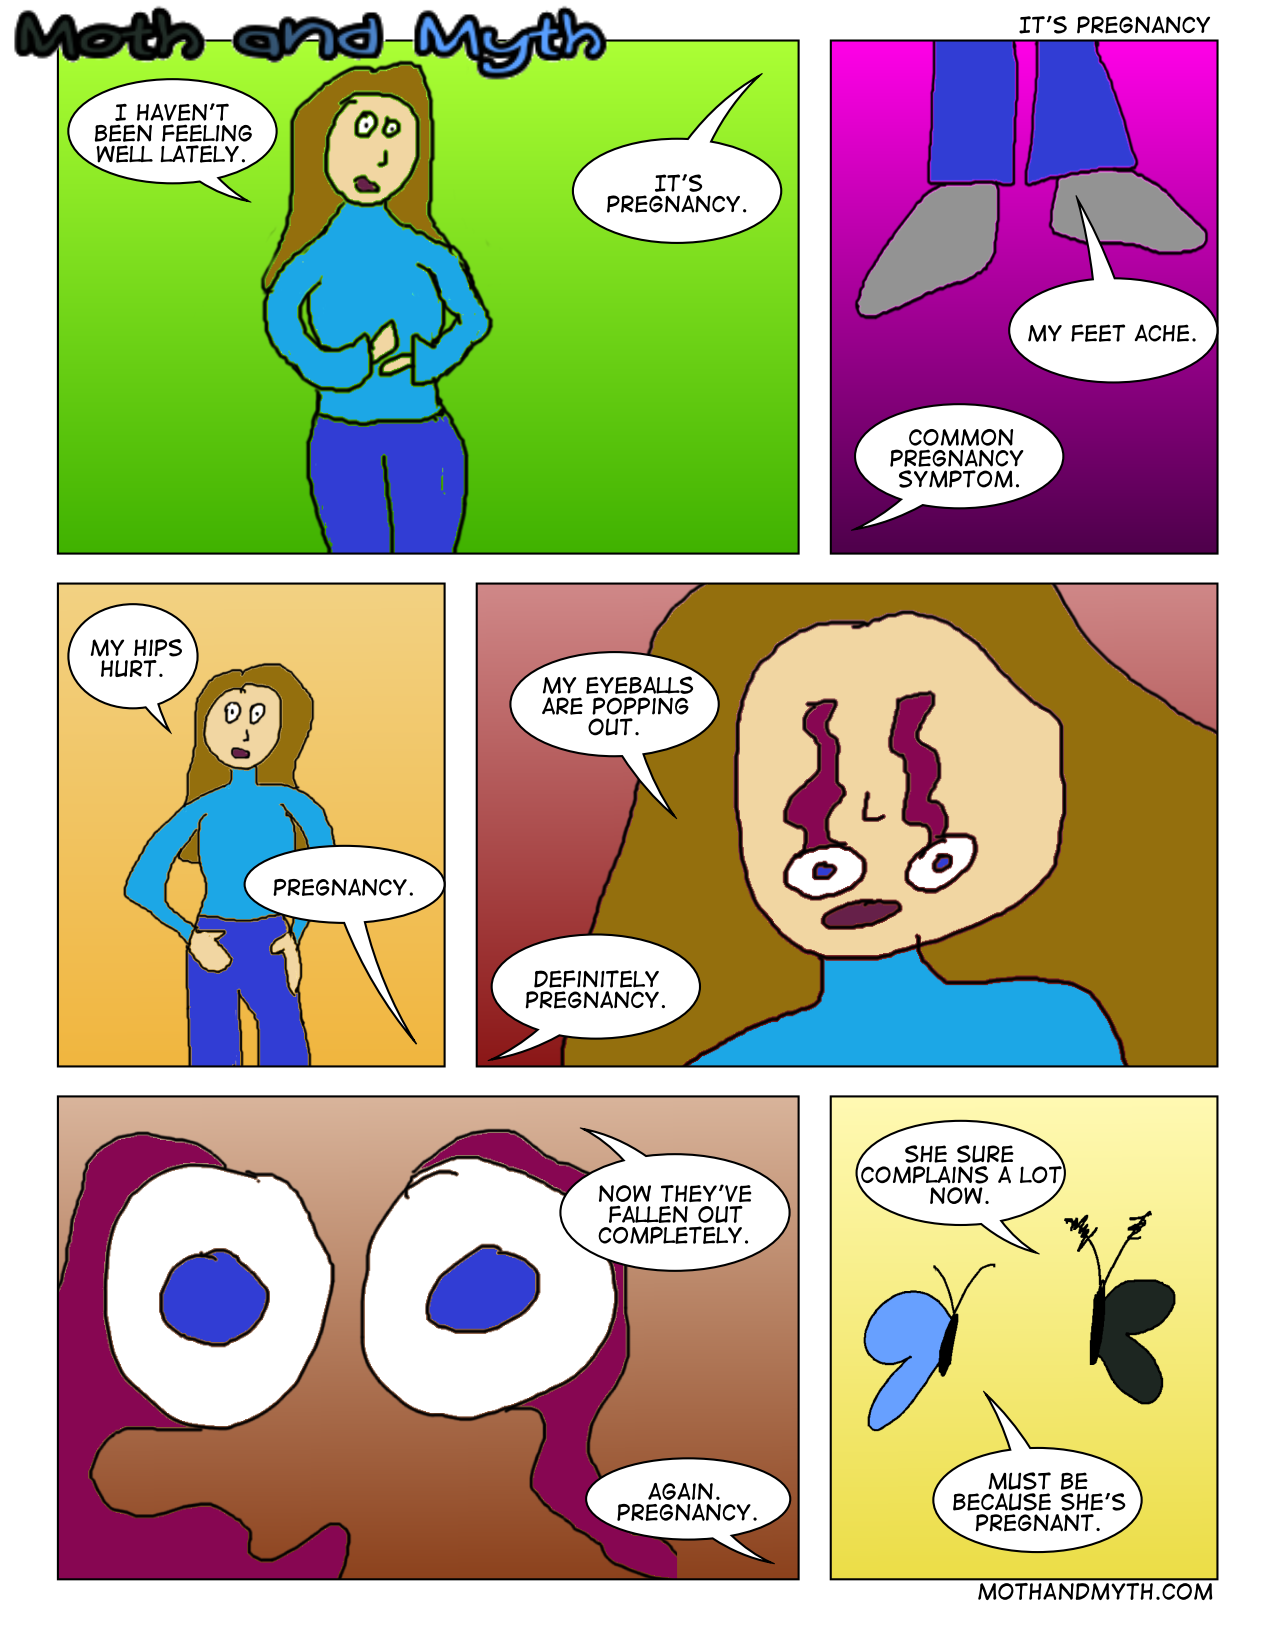 "She hasn't updated her comic in forever." 

"Most assuredly a pregnancy symptom."